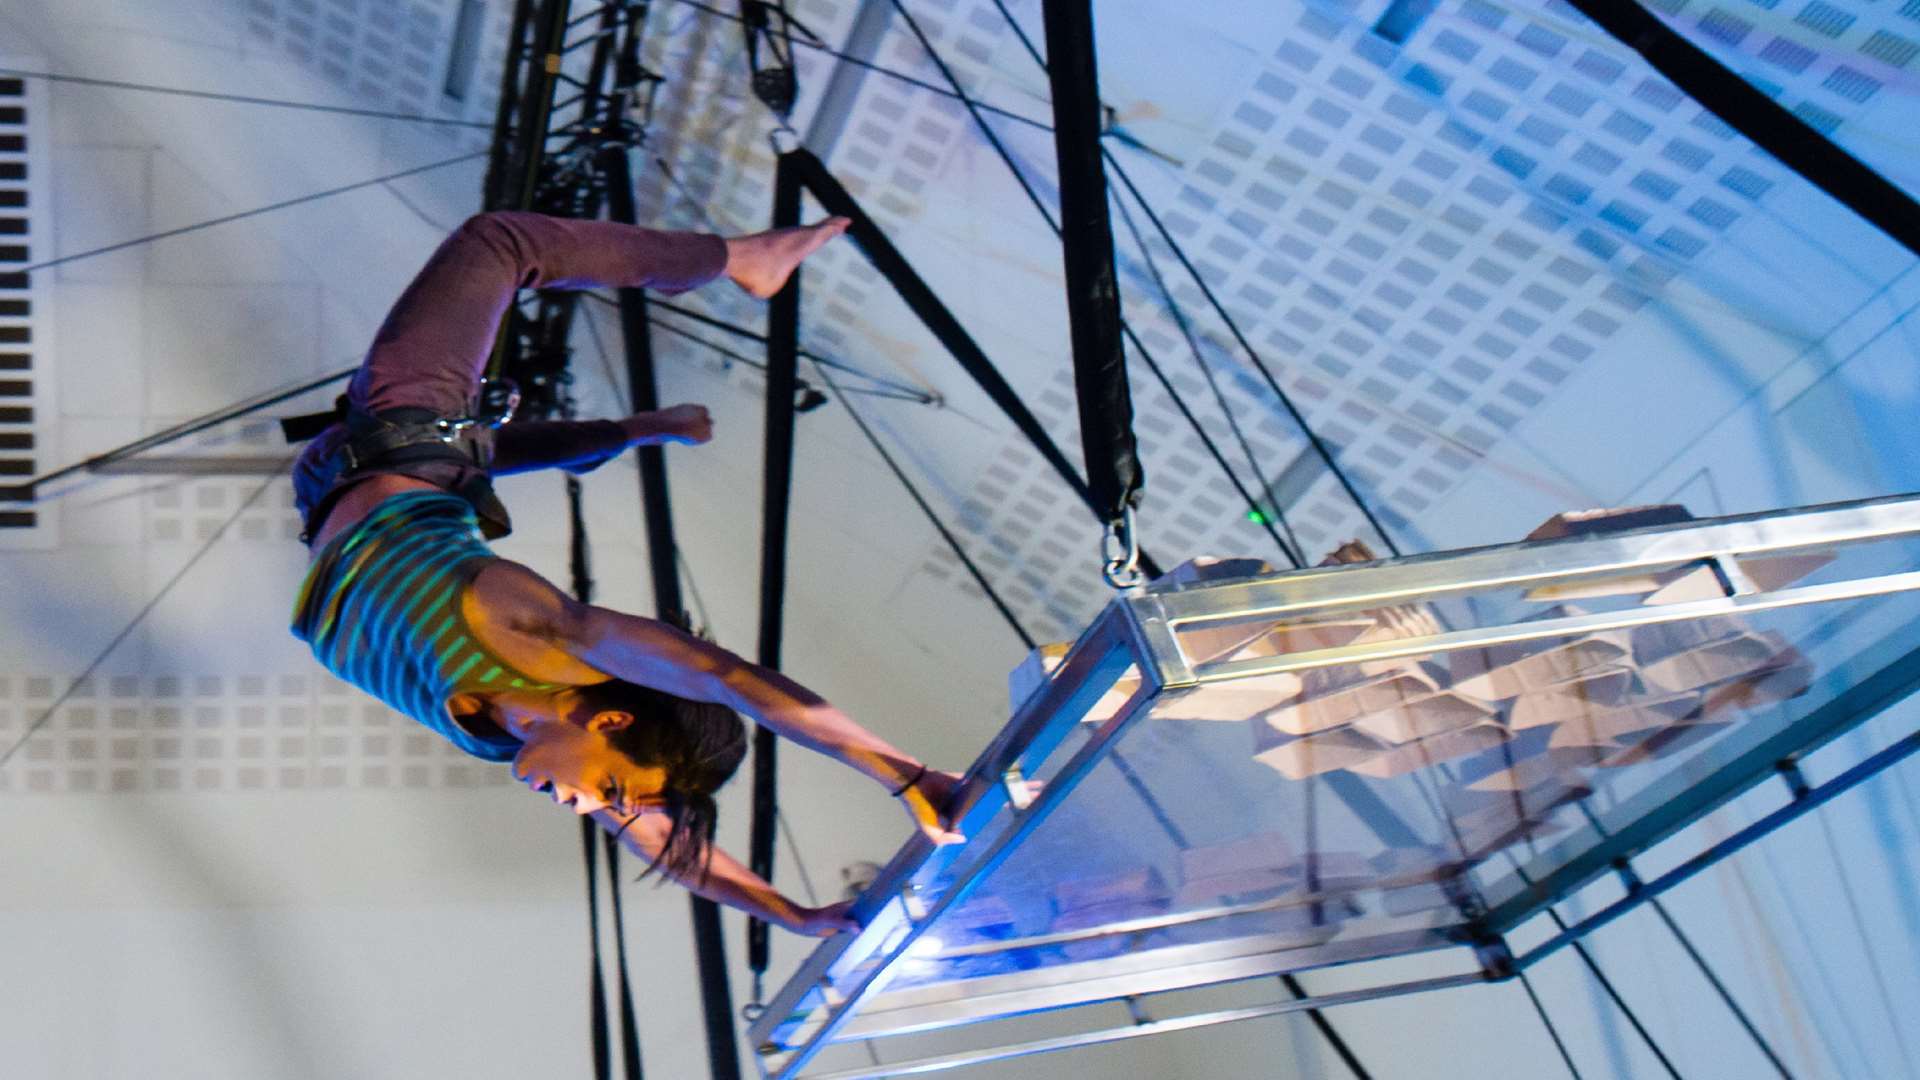 Depths of My Mind aerial show, coming to Canterbury